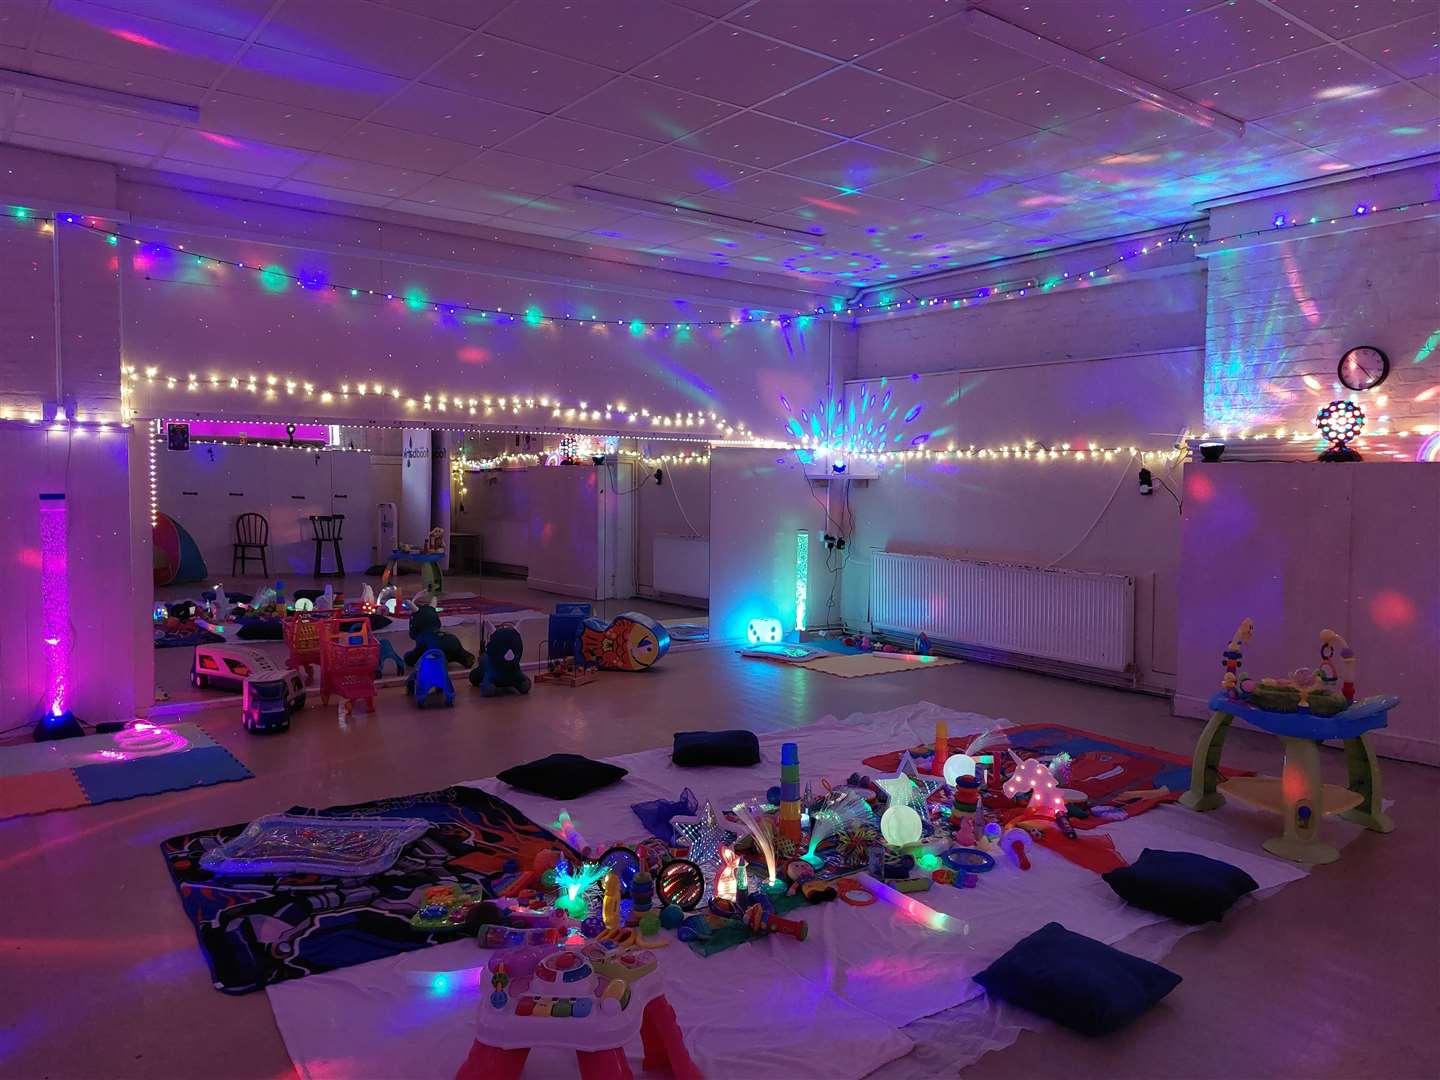 The children sensory play room is filled with lights and toys of all sorts. Picture: Claire Ionescu